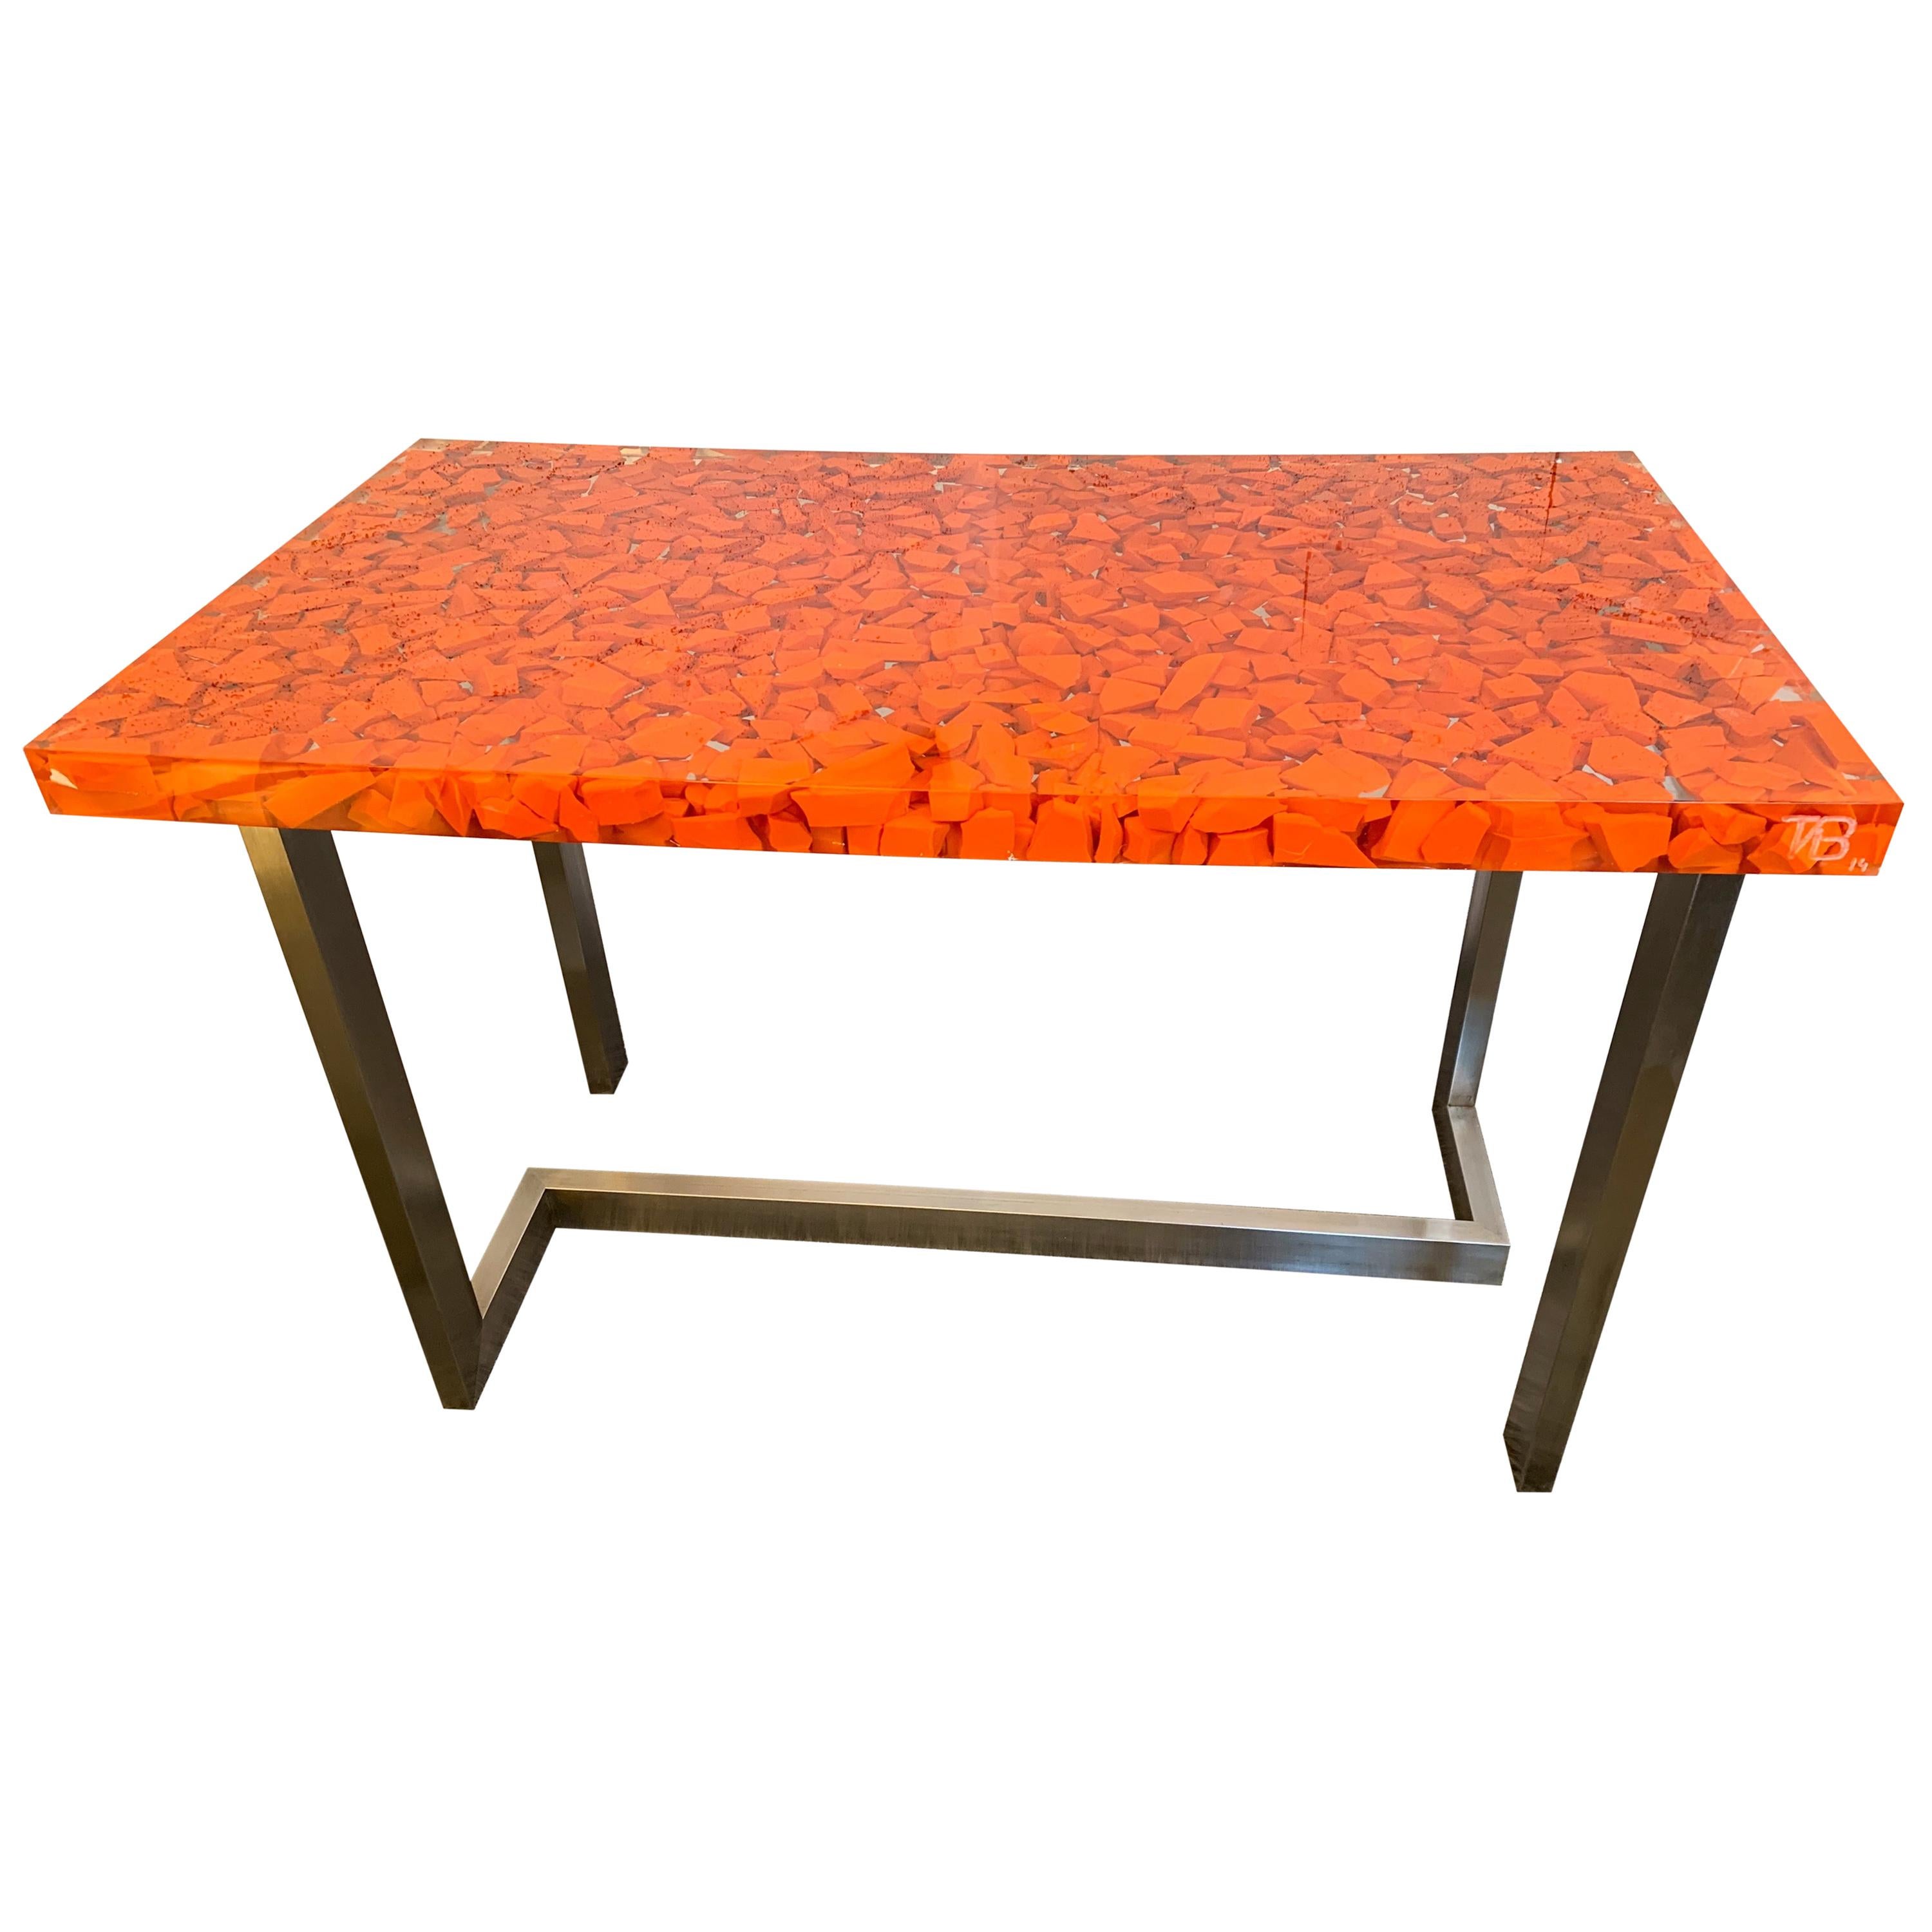 Resin Fractal Inclusion Console Table Desk by Thomas Brant, France, 2014